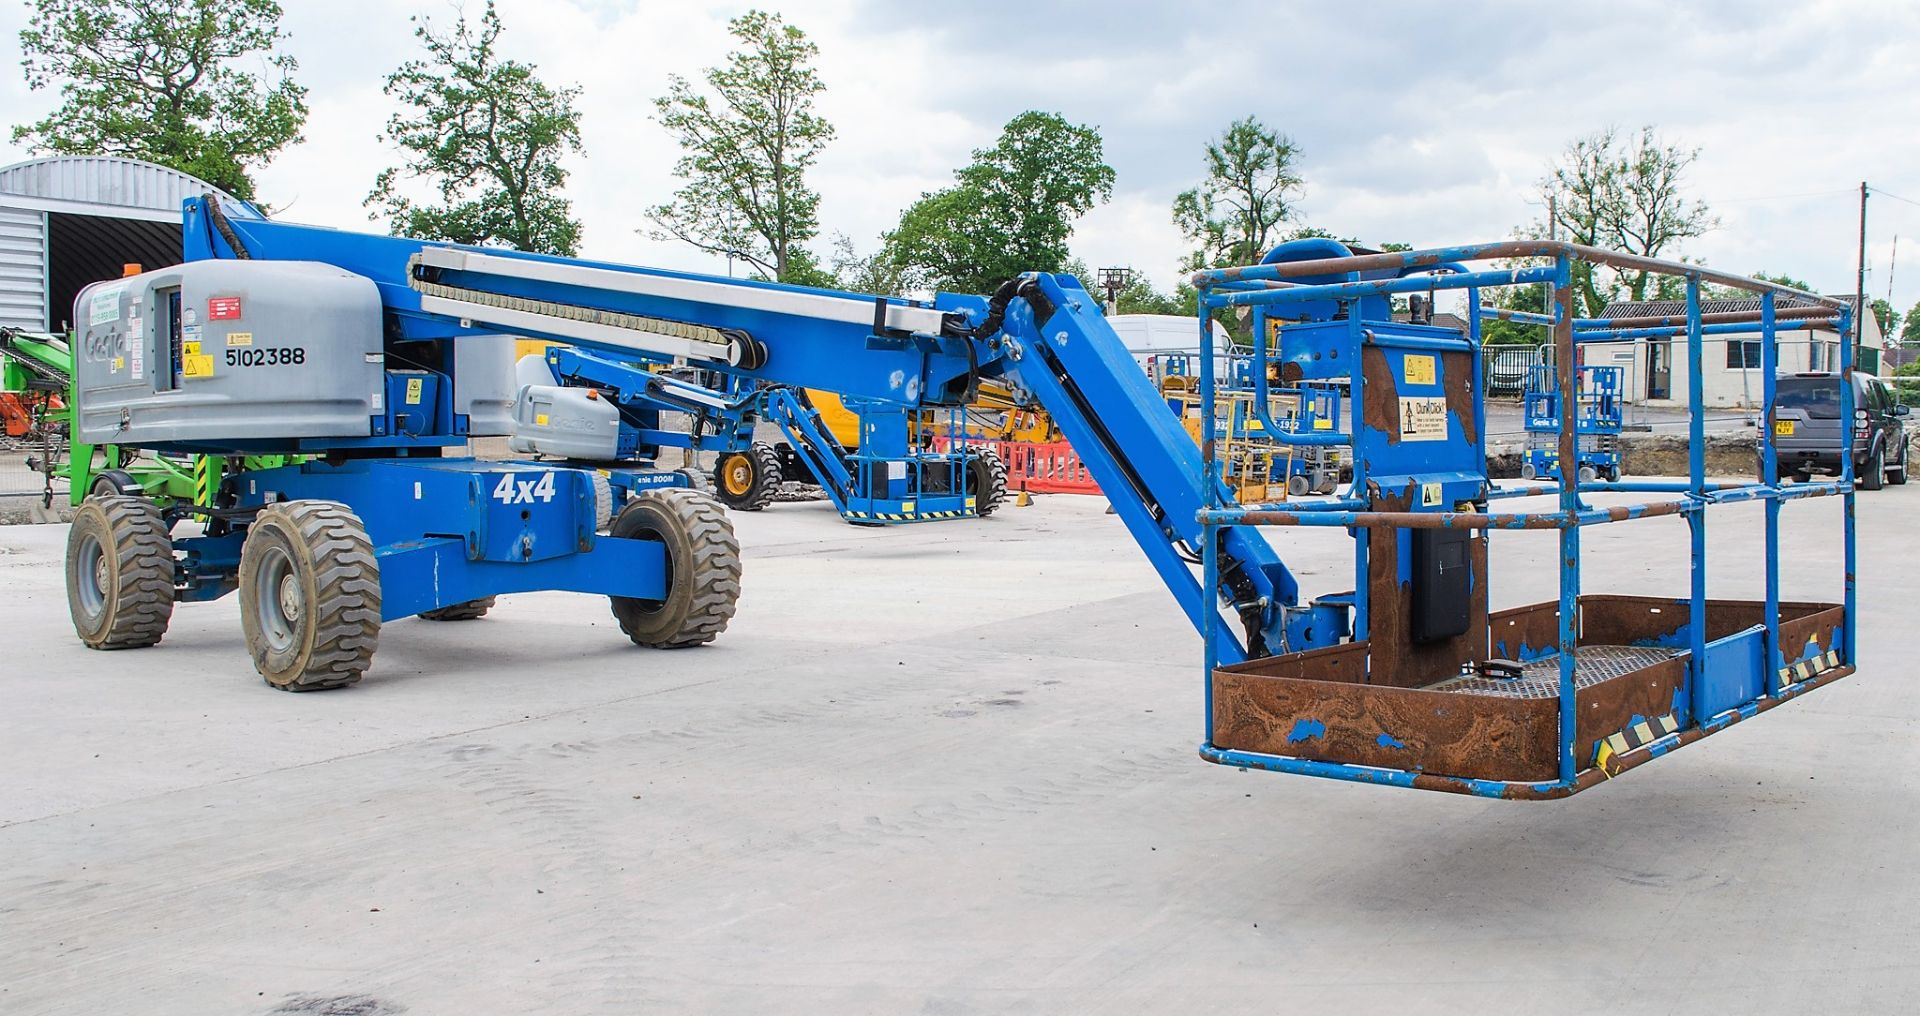 Genie S-45 diesel driven 45 ft boom lift access platform Year: 2014 S/N: 54514-18197 Recorded Hours: - Image 2 of 18